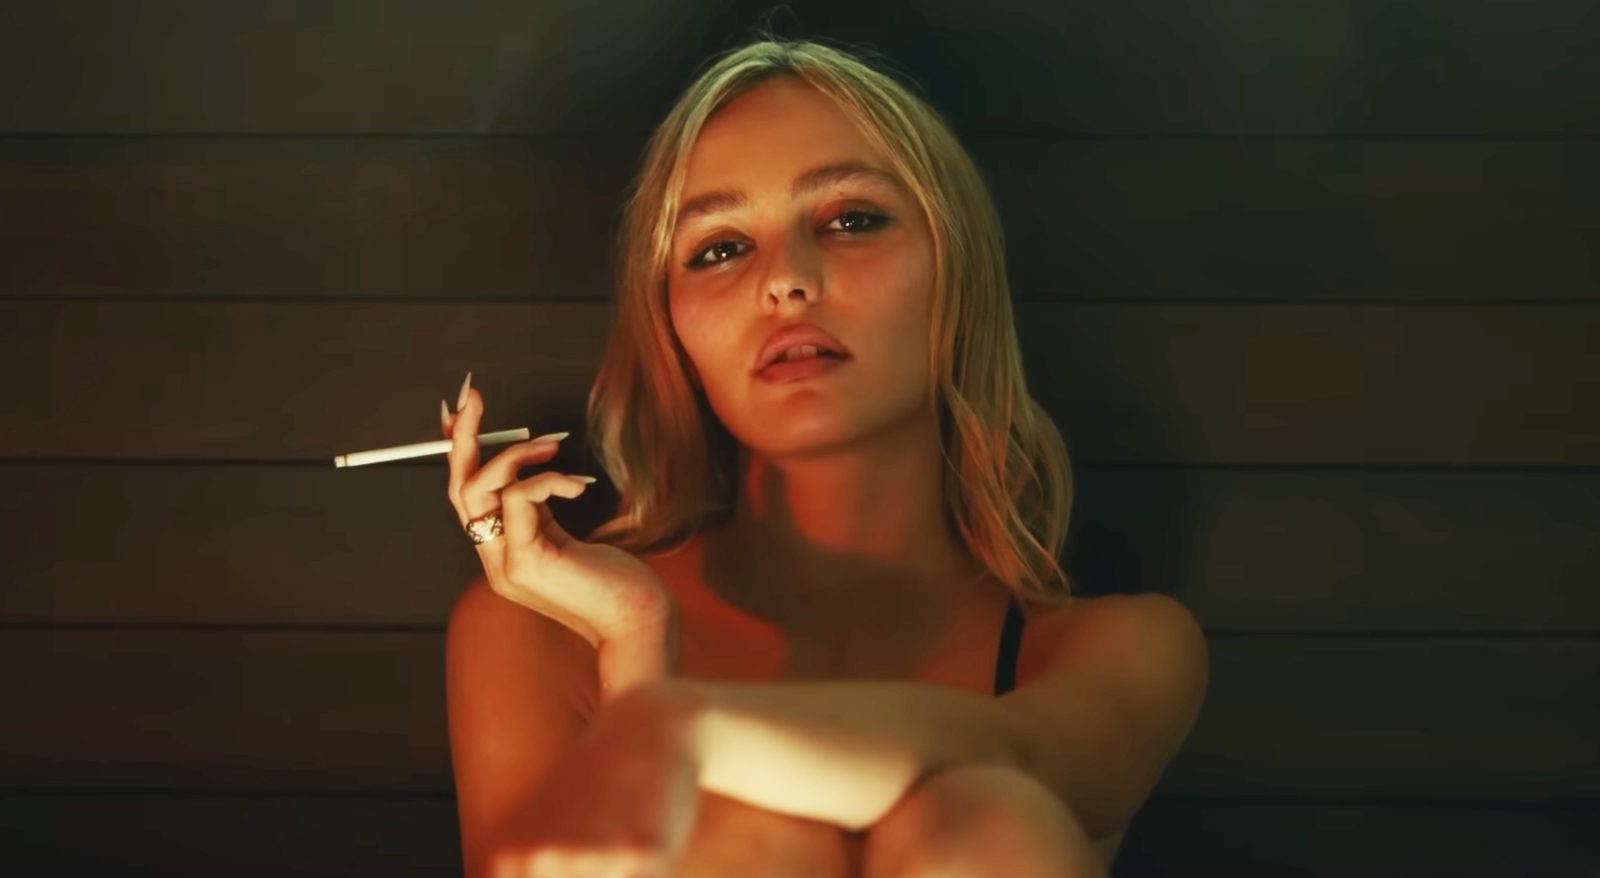 Sex sells in new trailer for HBO's The Idol starring Lily-Rose Depp and The  Weeknd